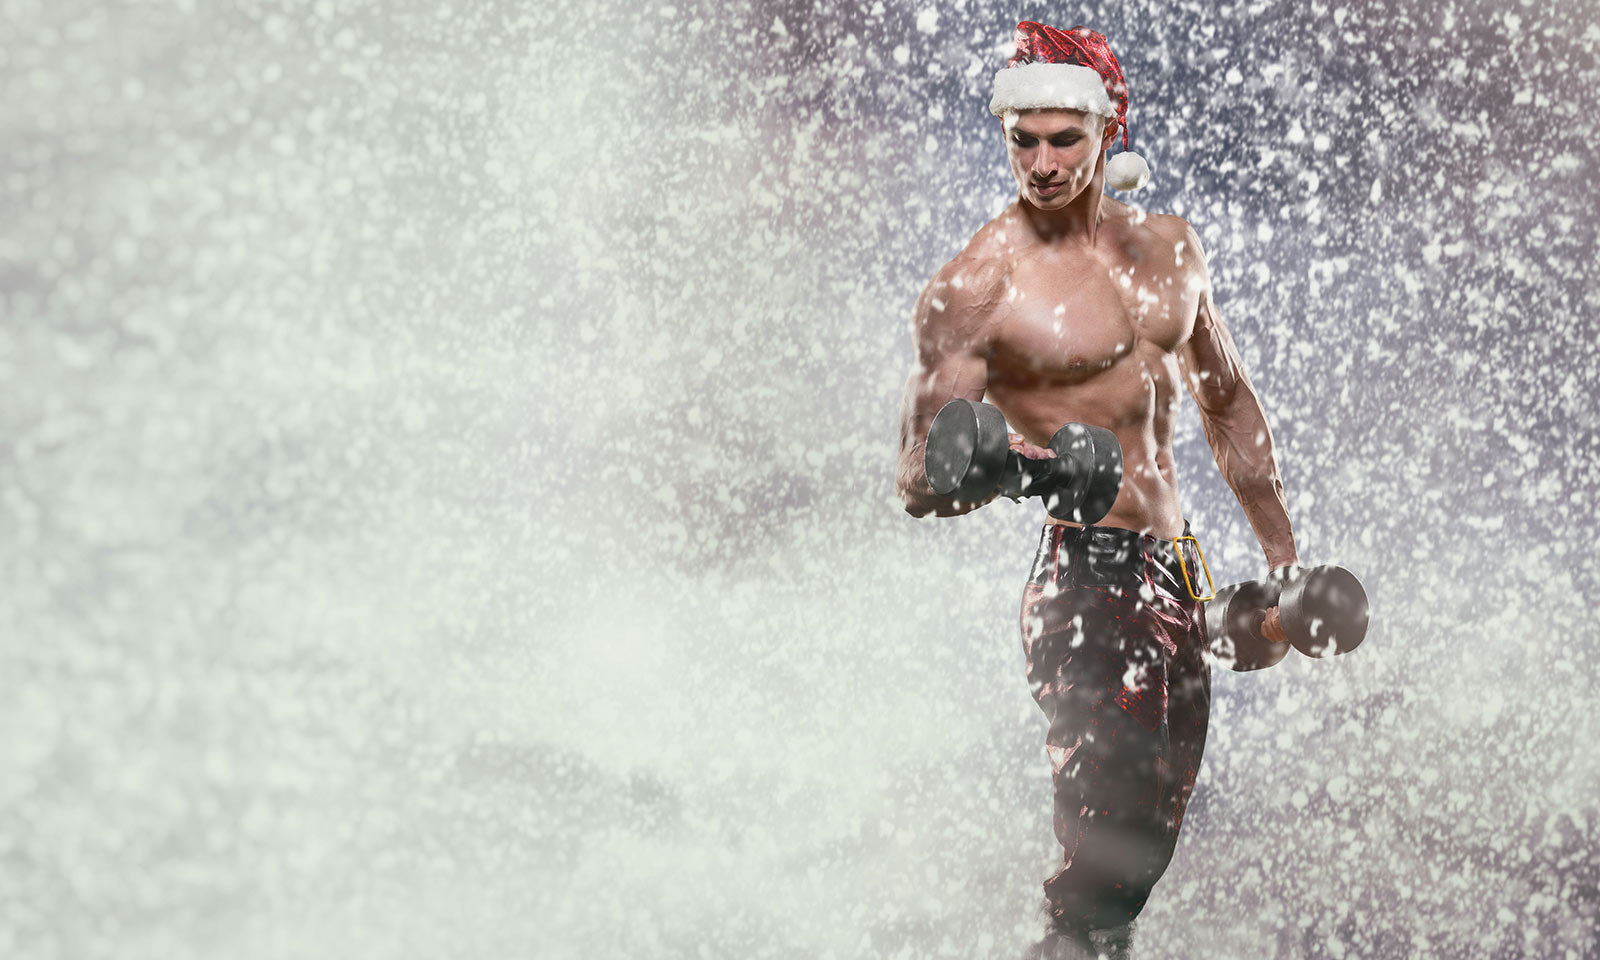 Gift Ideas All Bodybuilders Will Love This Holiday